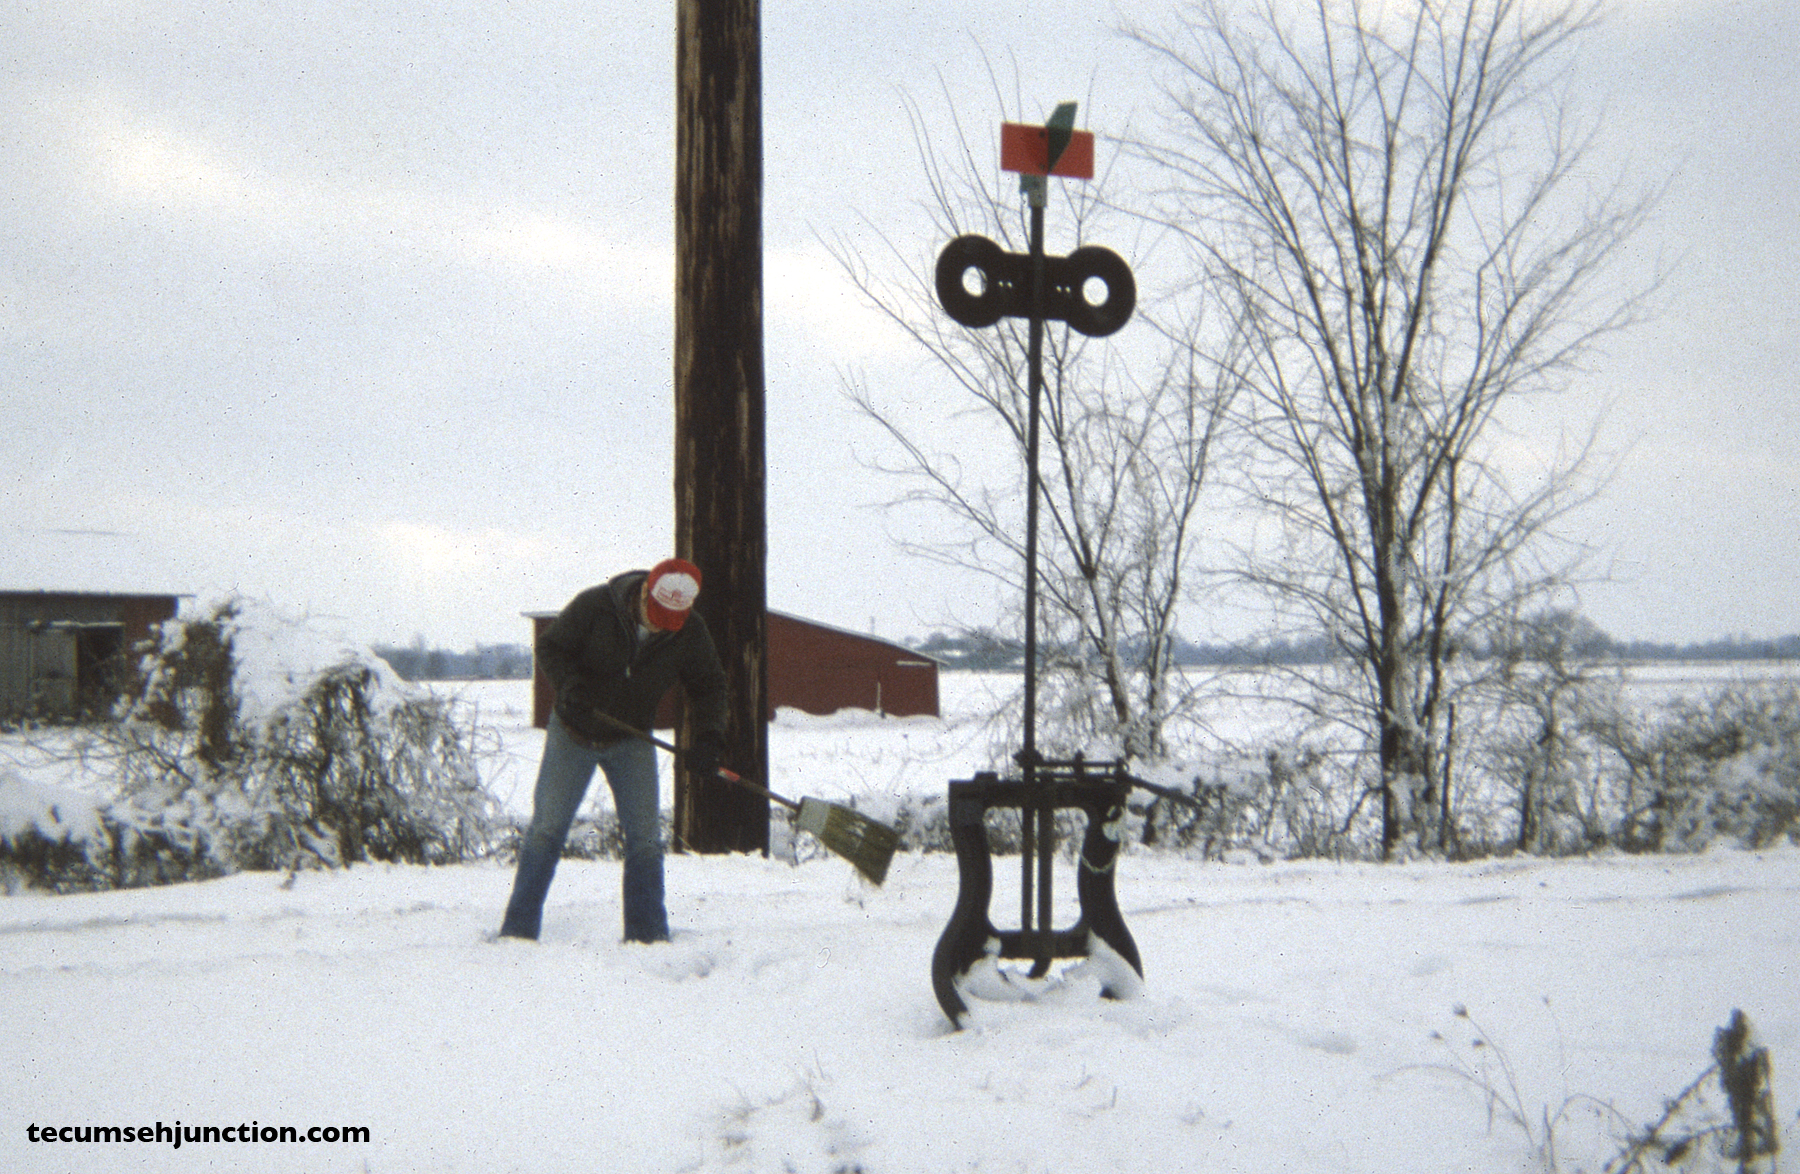 A crew member sweeps the switch at Grosvenor, Michigan. (12 December 1981)